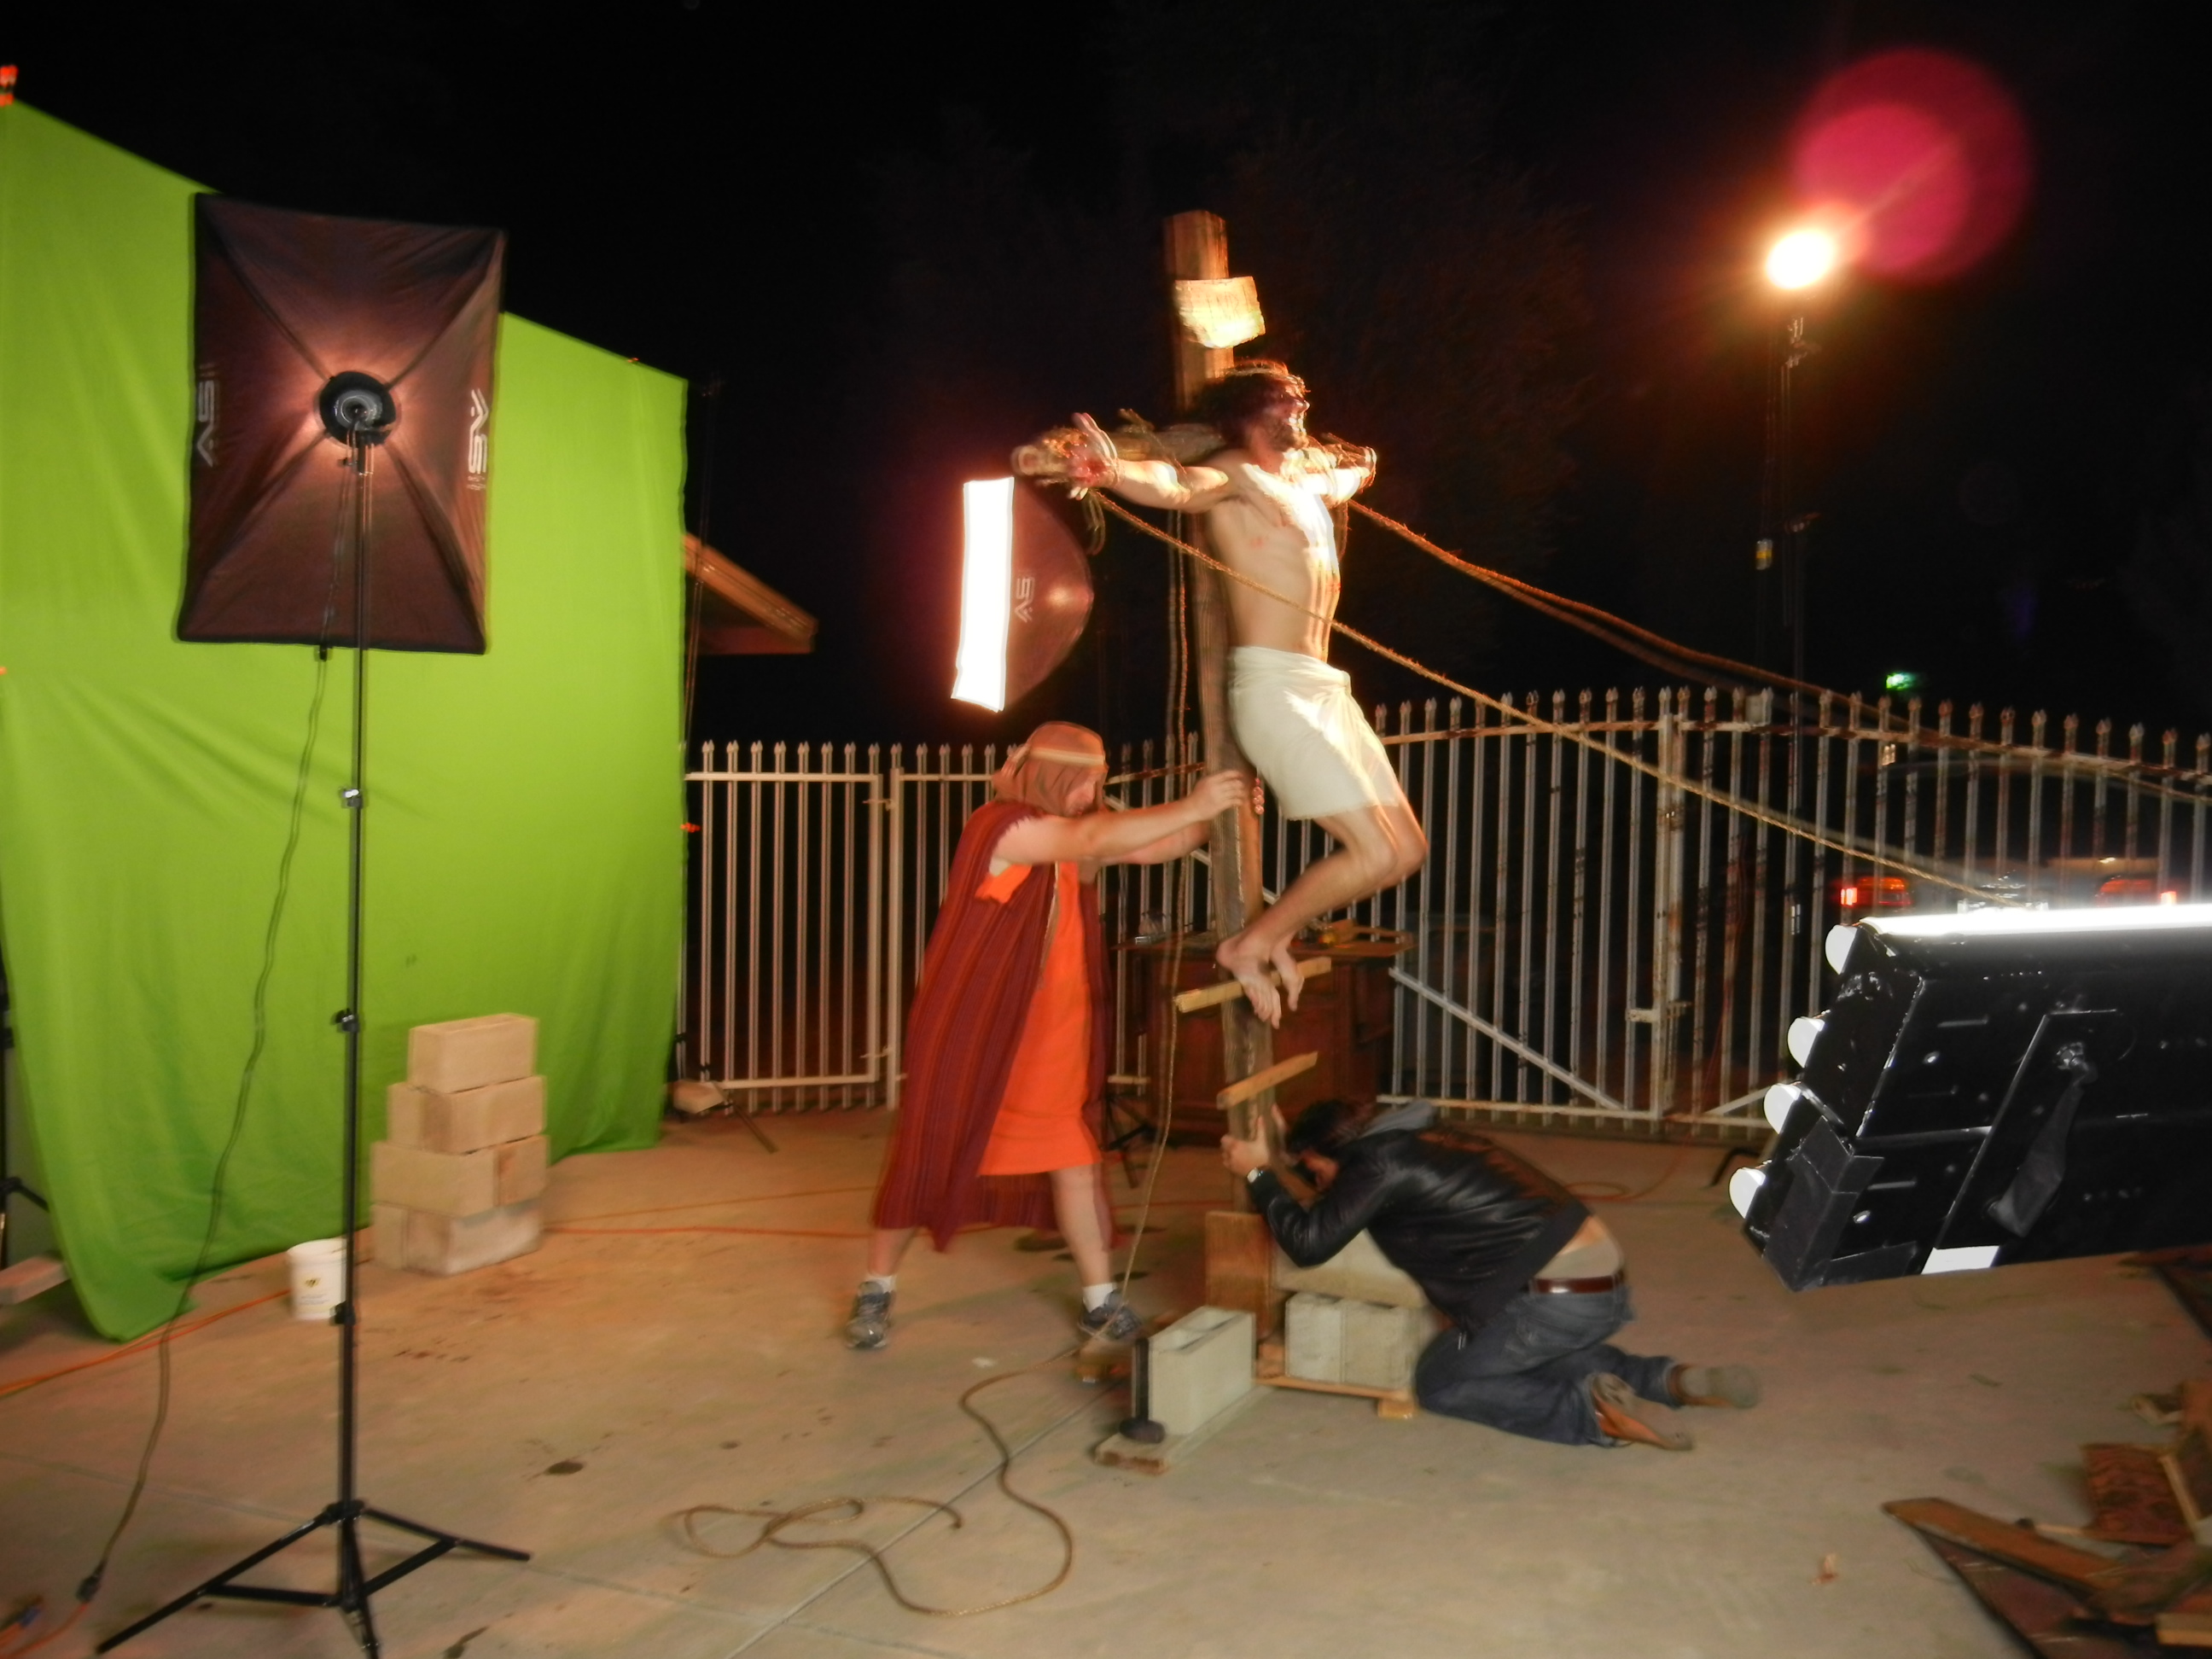 Andrew Skully portraying Jesus while being lifted up on the cross as Brian Reed Garvin and Brian Iliescu hold him for safety in this green screen effects scene.